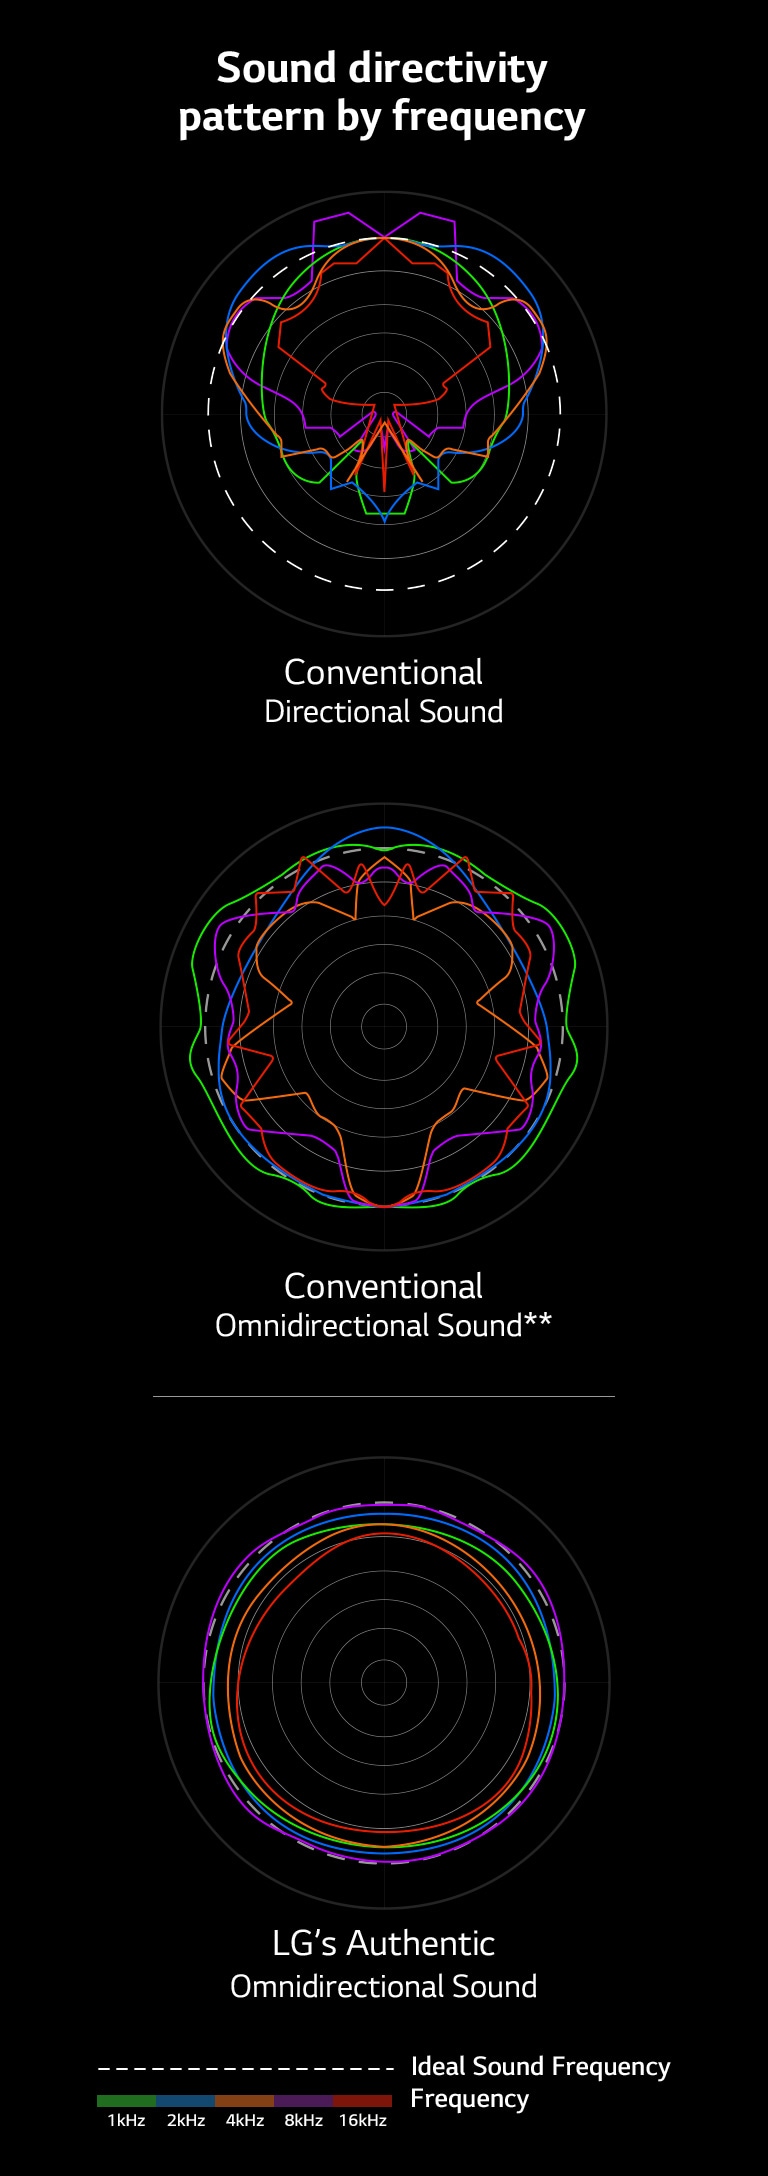 An image that compares the sound wavelengths of conventional directional sound and conventional omnidirectional sound with the sound wavelengths of LG's Authentic omnidirectional sound.